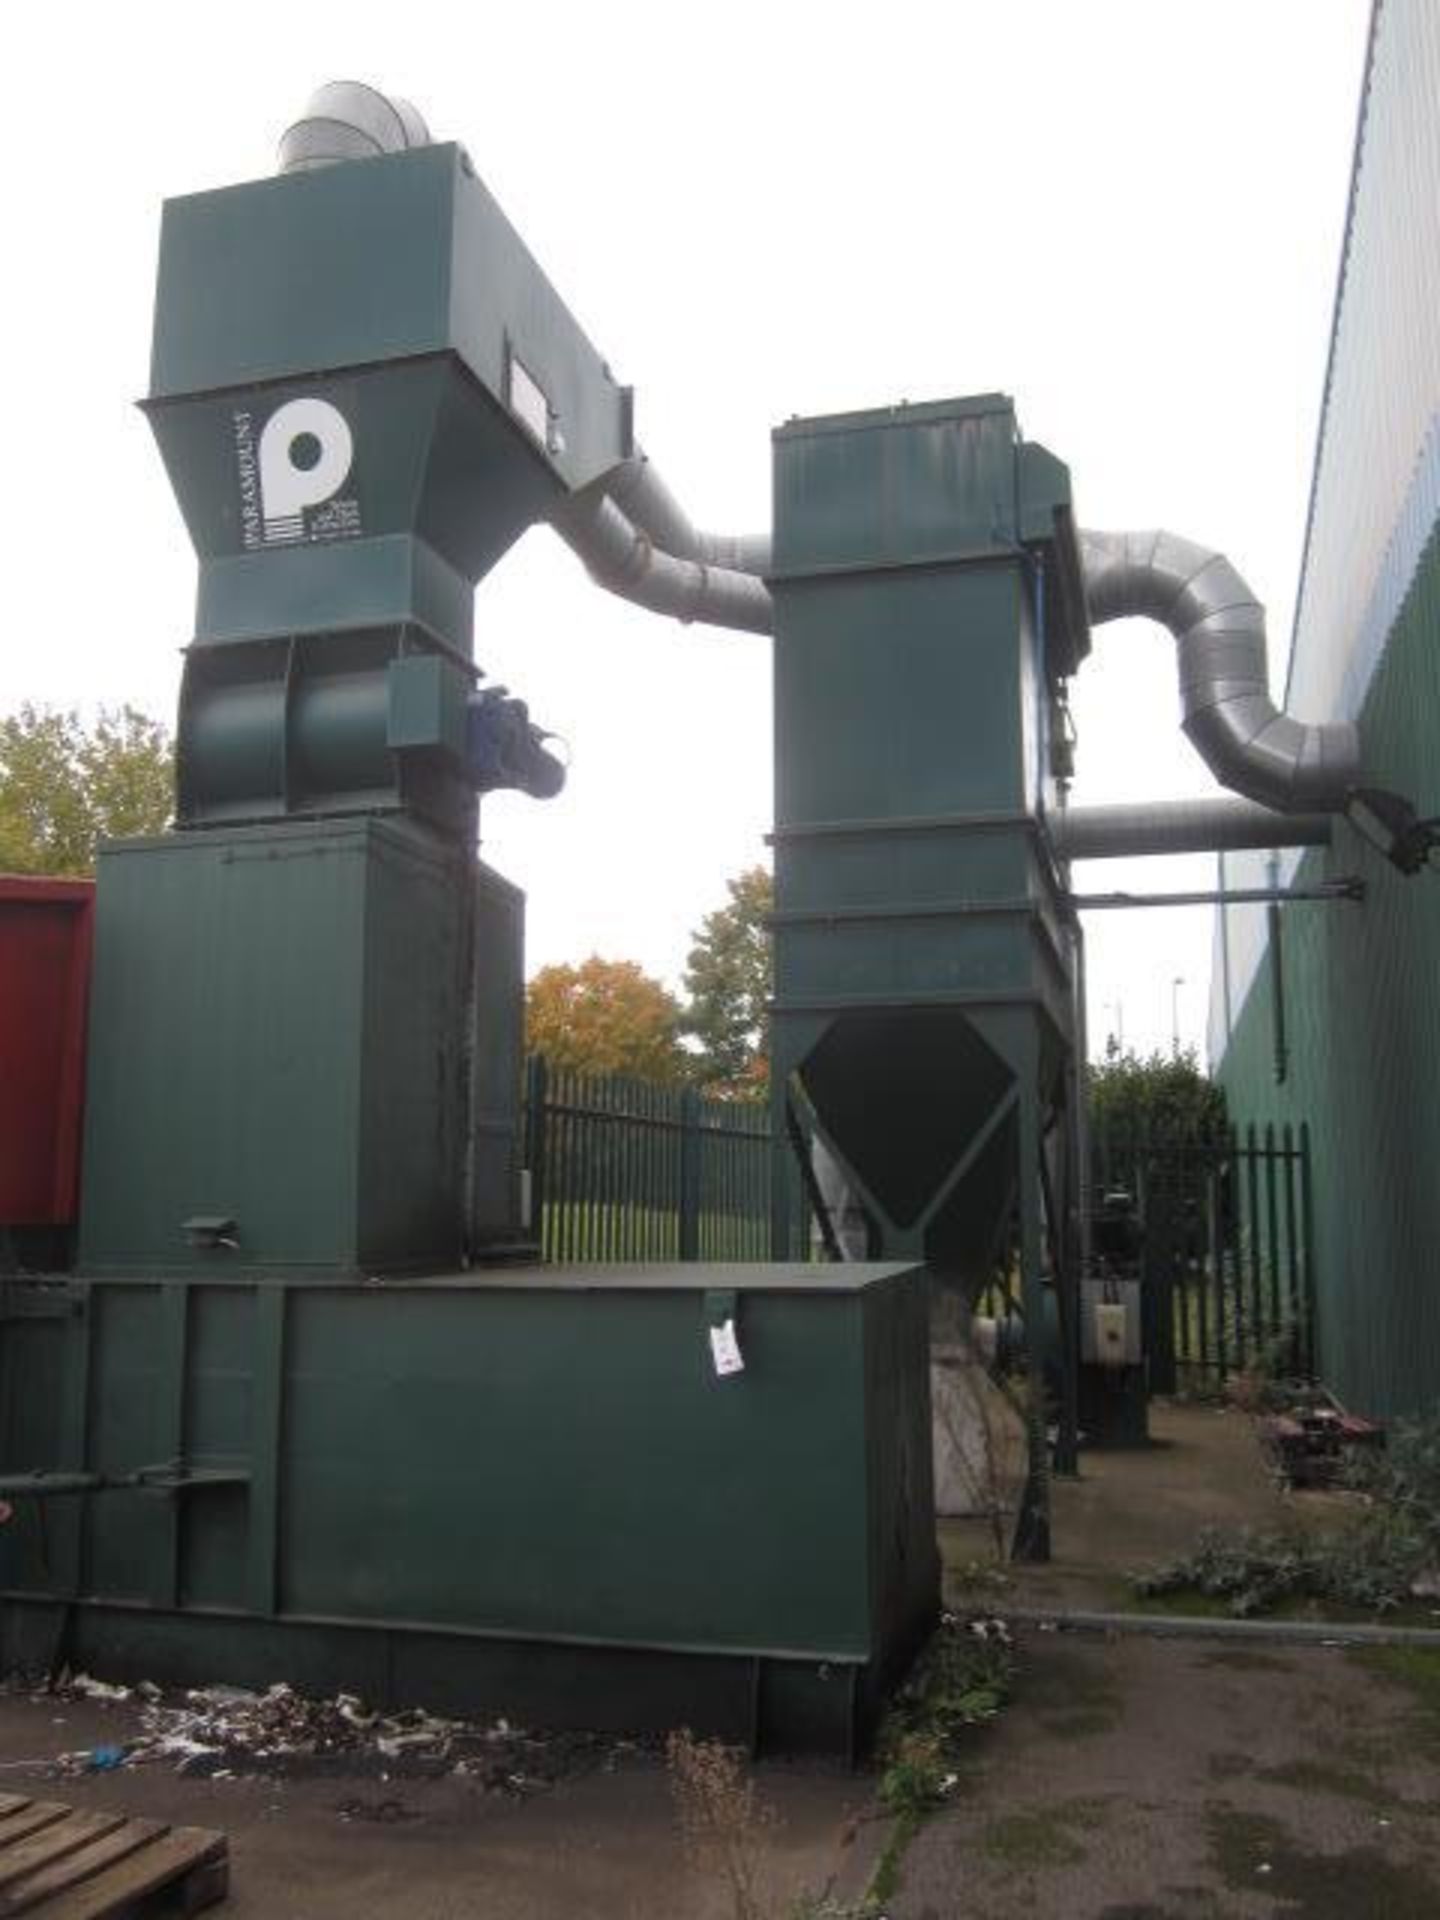 Paramount waste & dust extraction system and compactor to include: - Paramount motorised